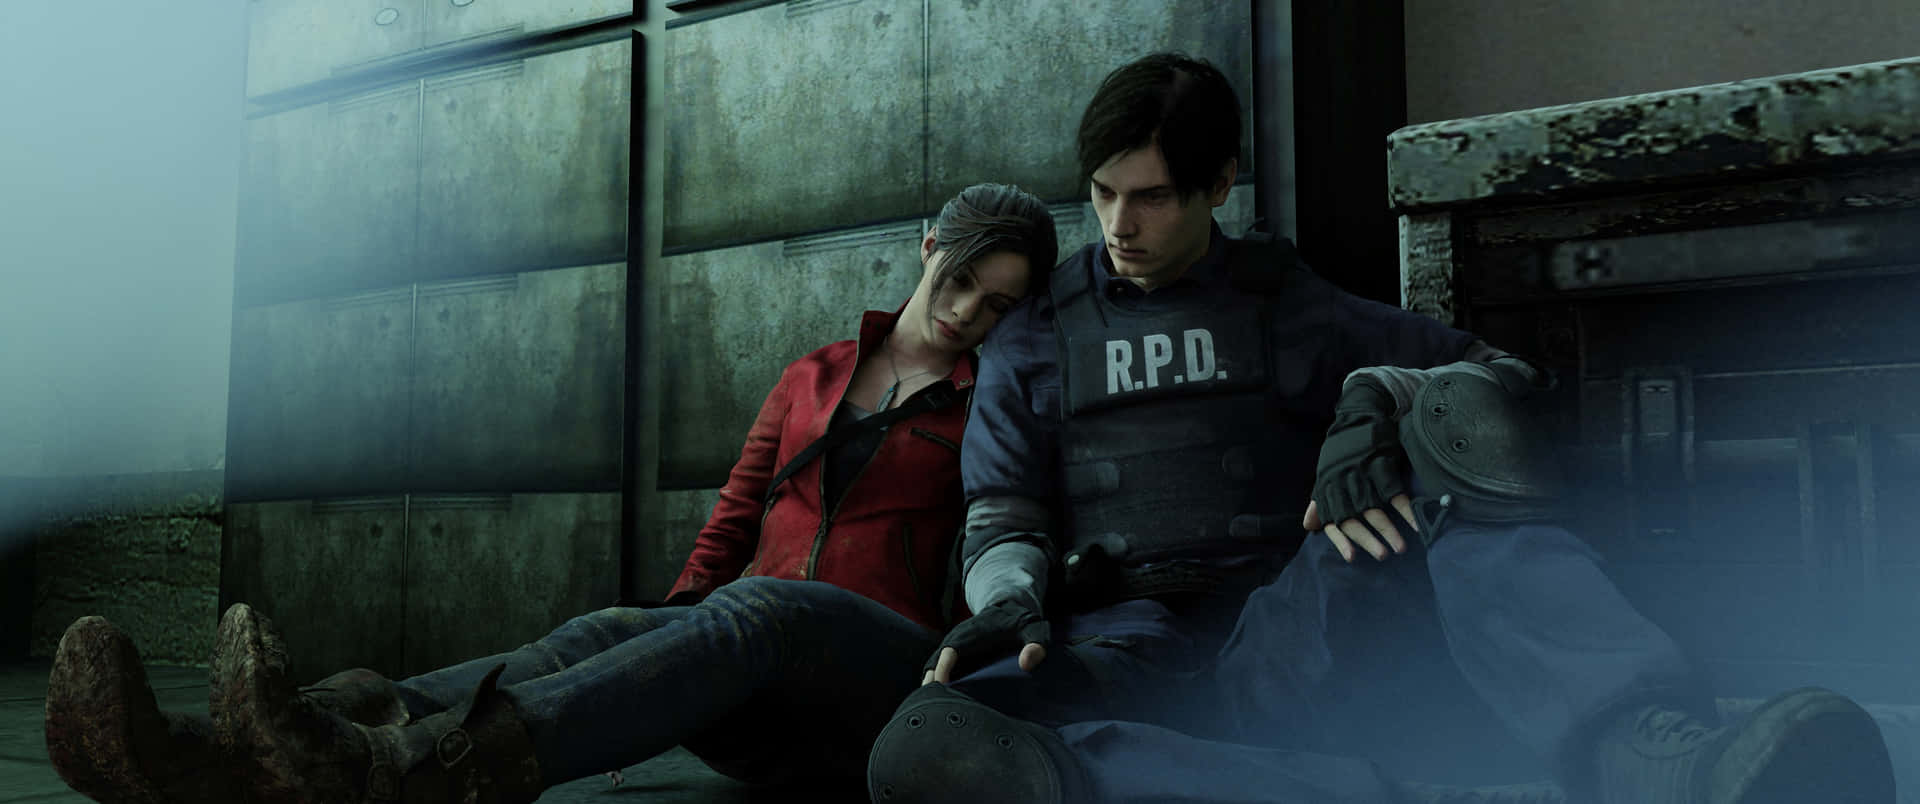 Leon Kennedy And Claire Redfield - Surviving Horror Together Wallpaper